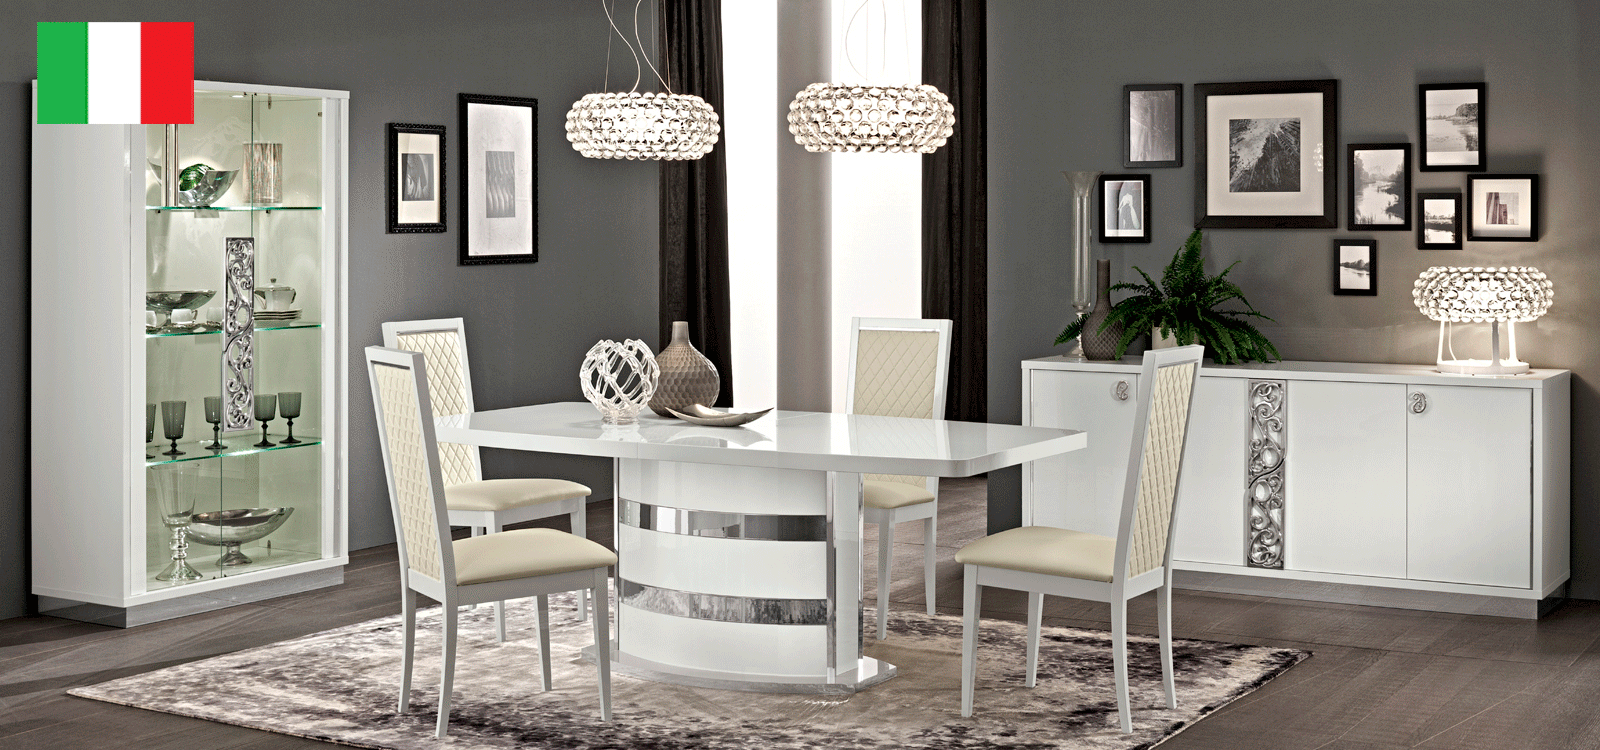 Brands Camel Modum Collection, Italy Roma Dining White, Italy